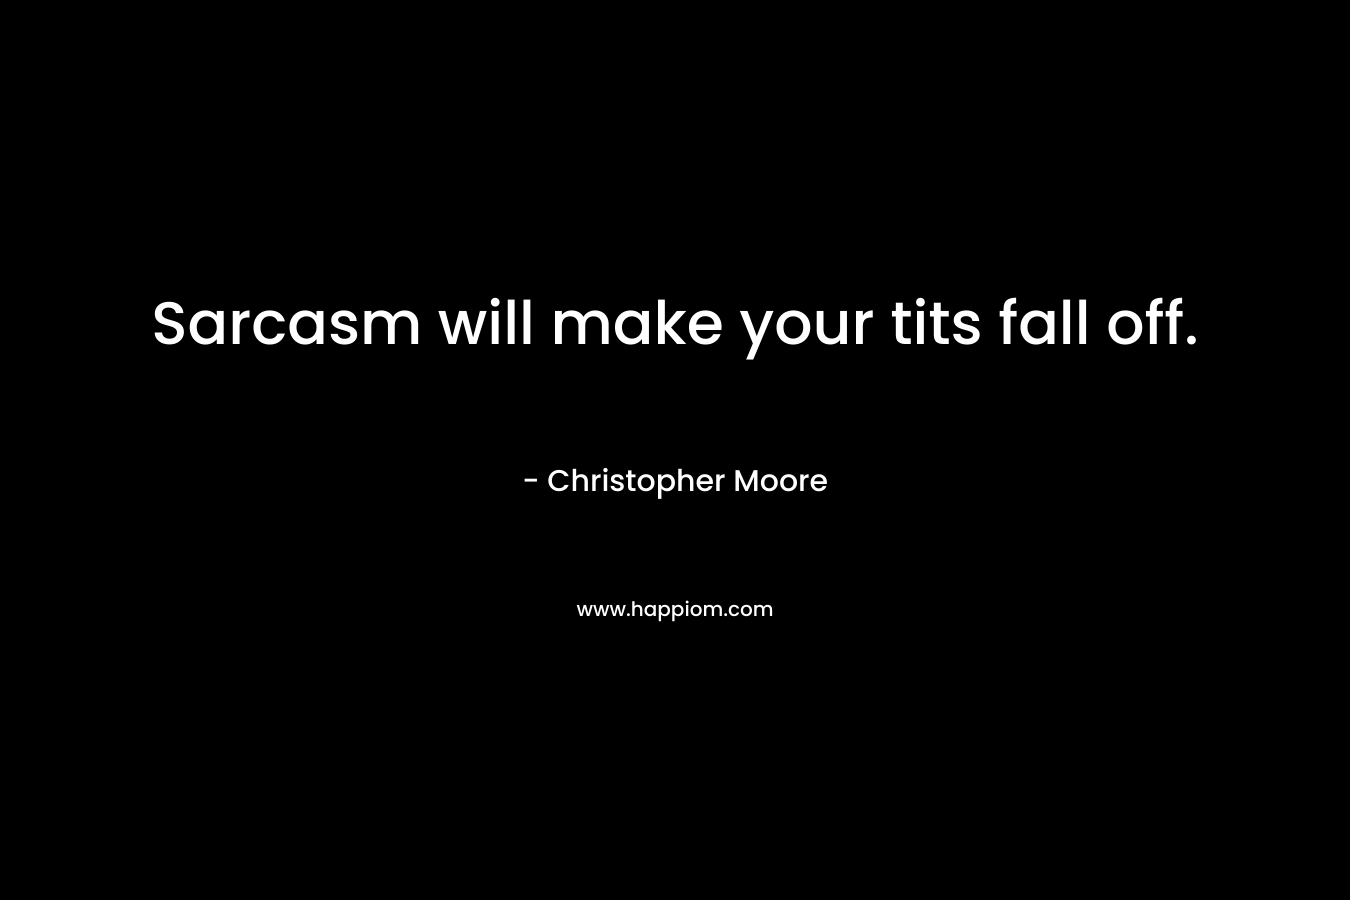 Sarcasm will make your tits fall off. – Christopher Moore